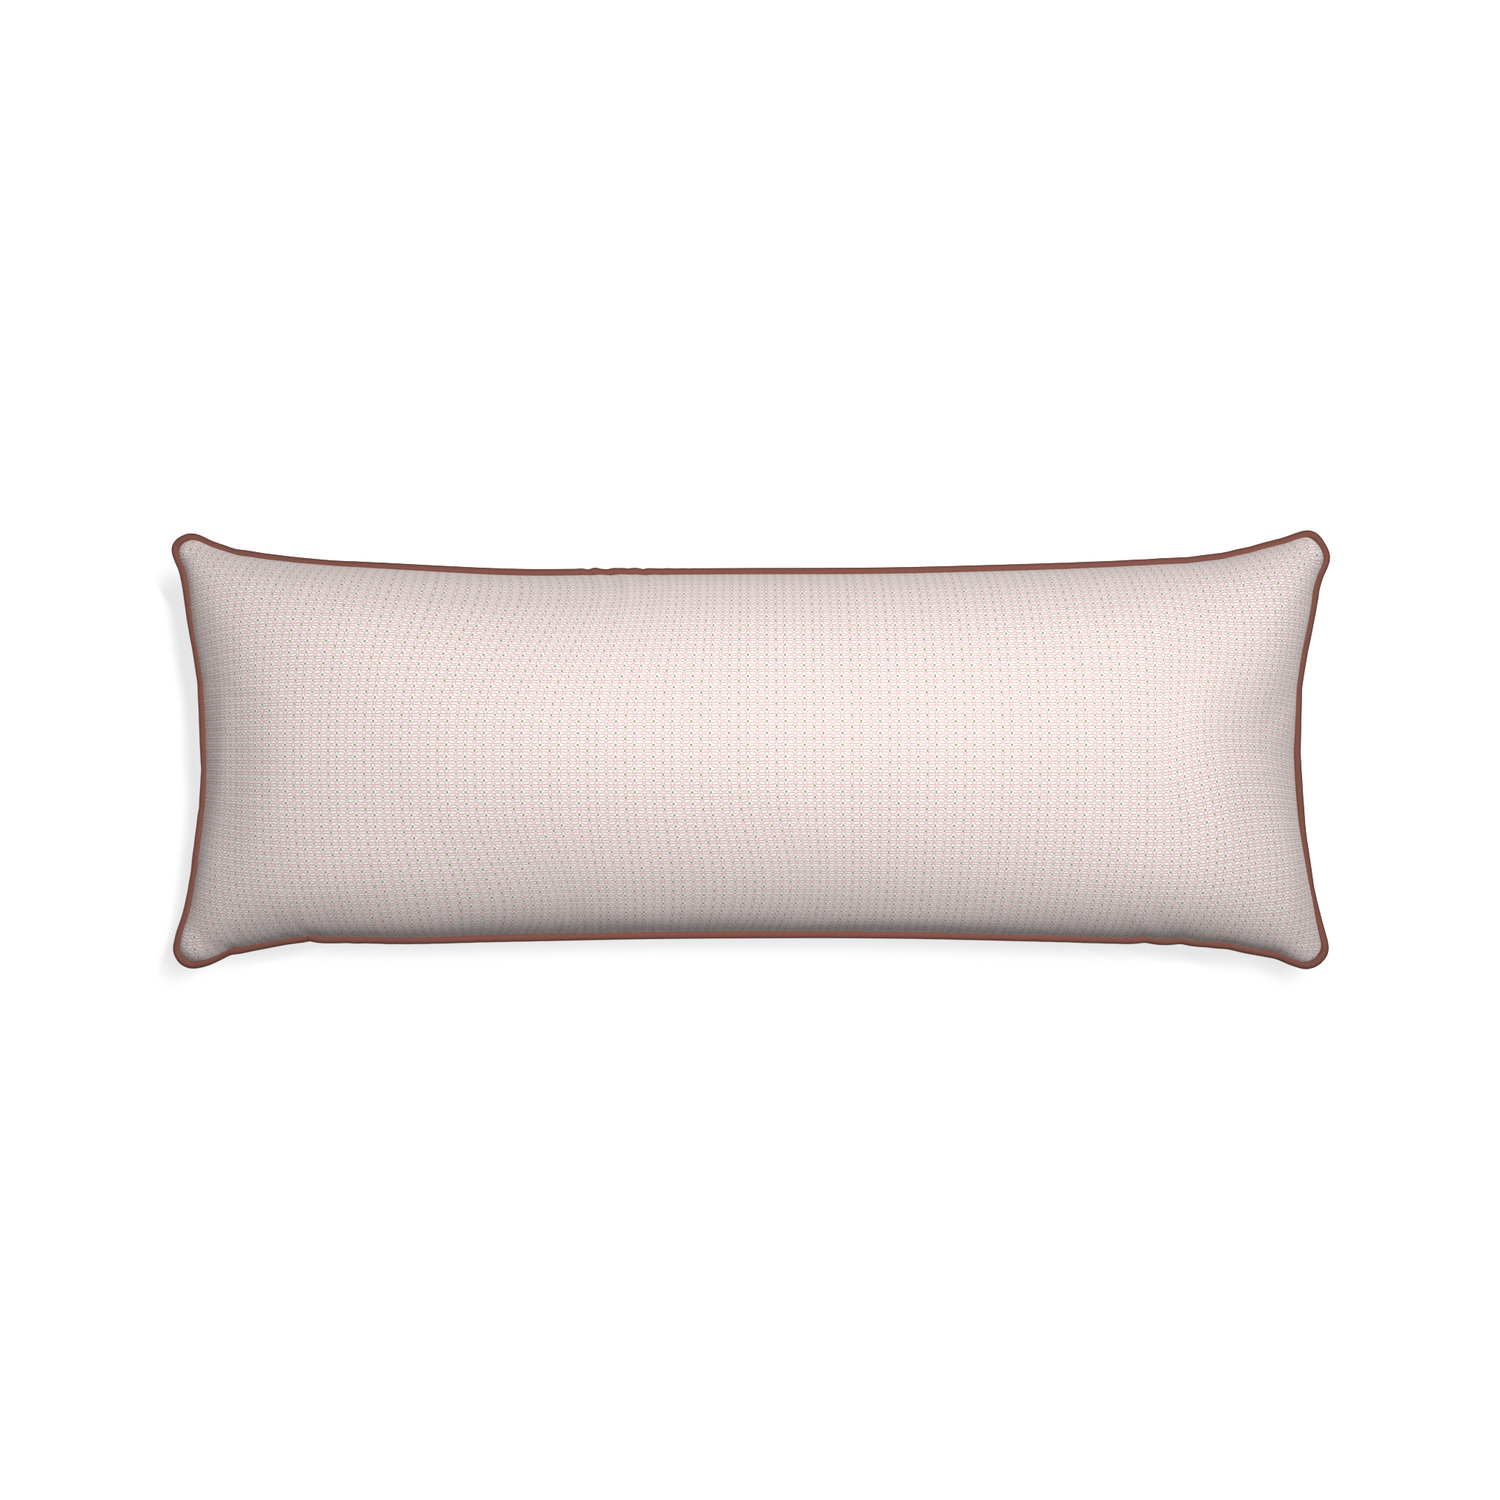 Xl-lumbar loomi pink custom pink geometricpillow with w piping on white background